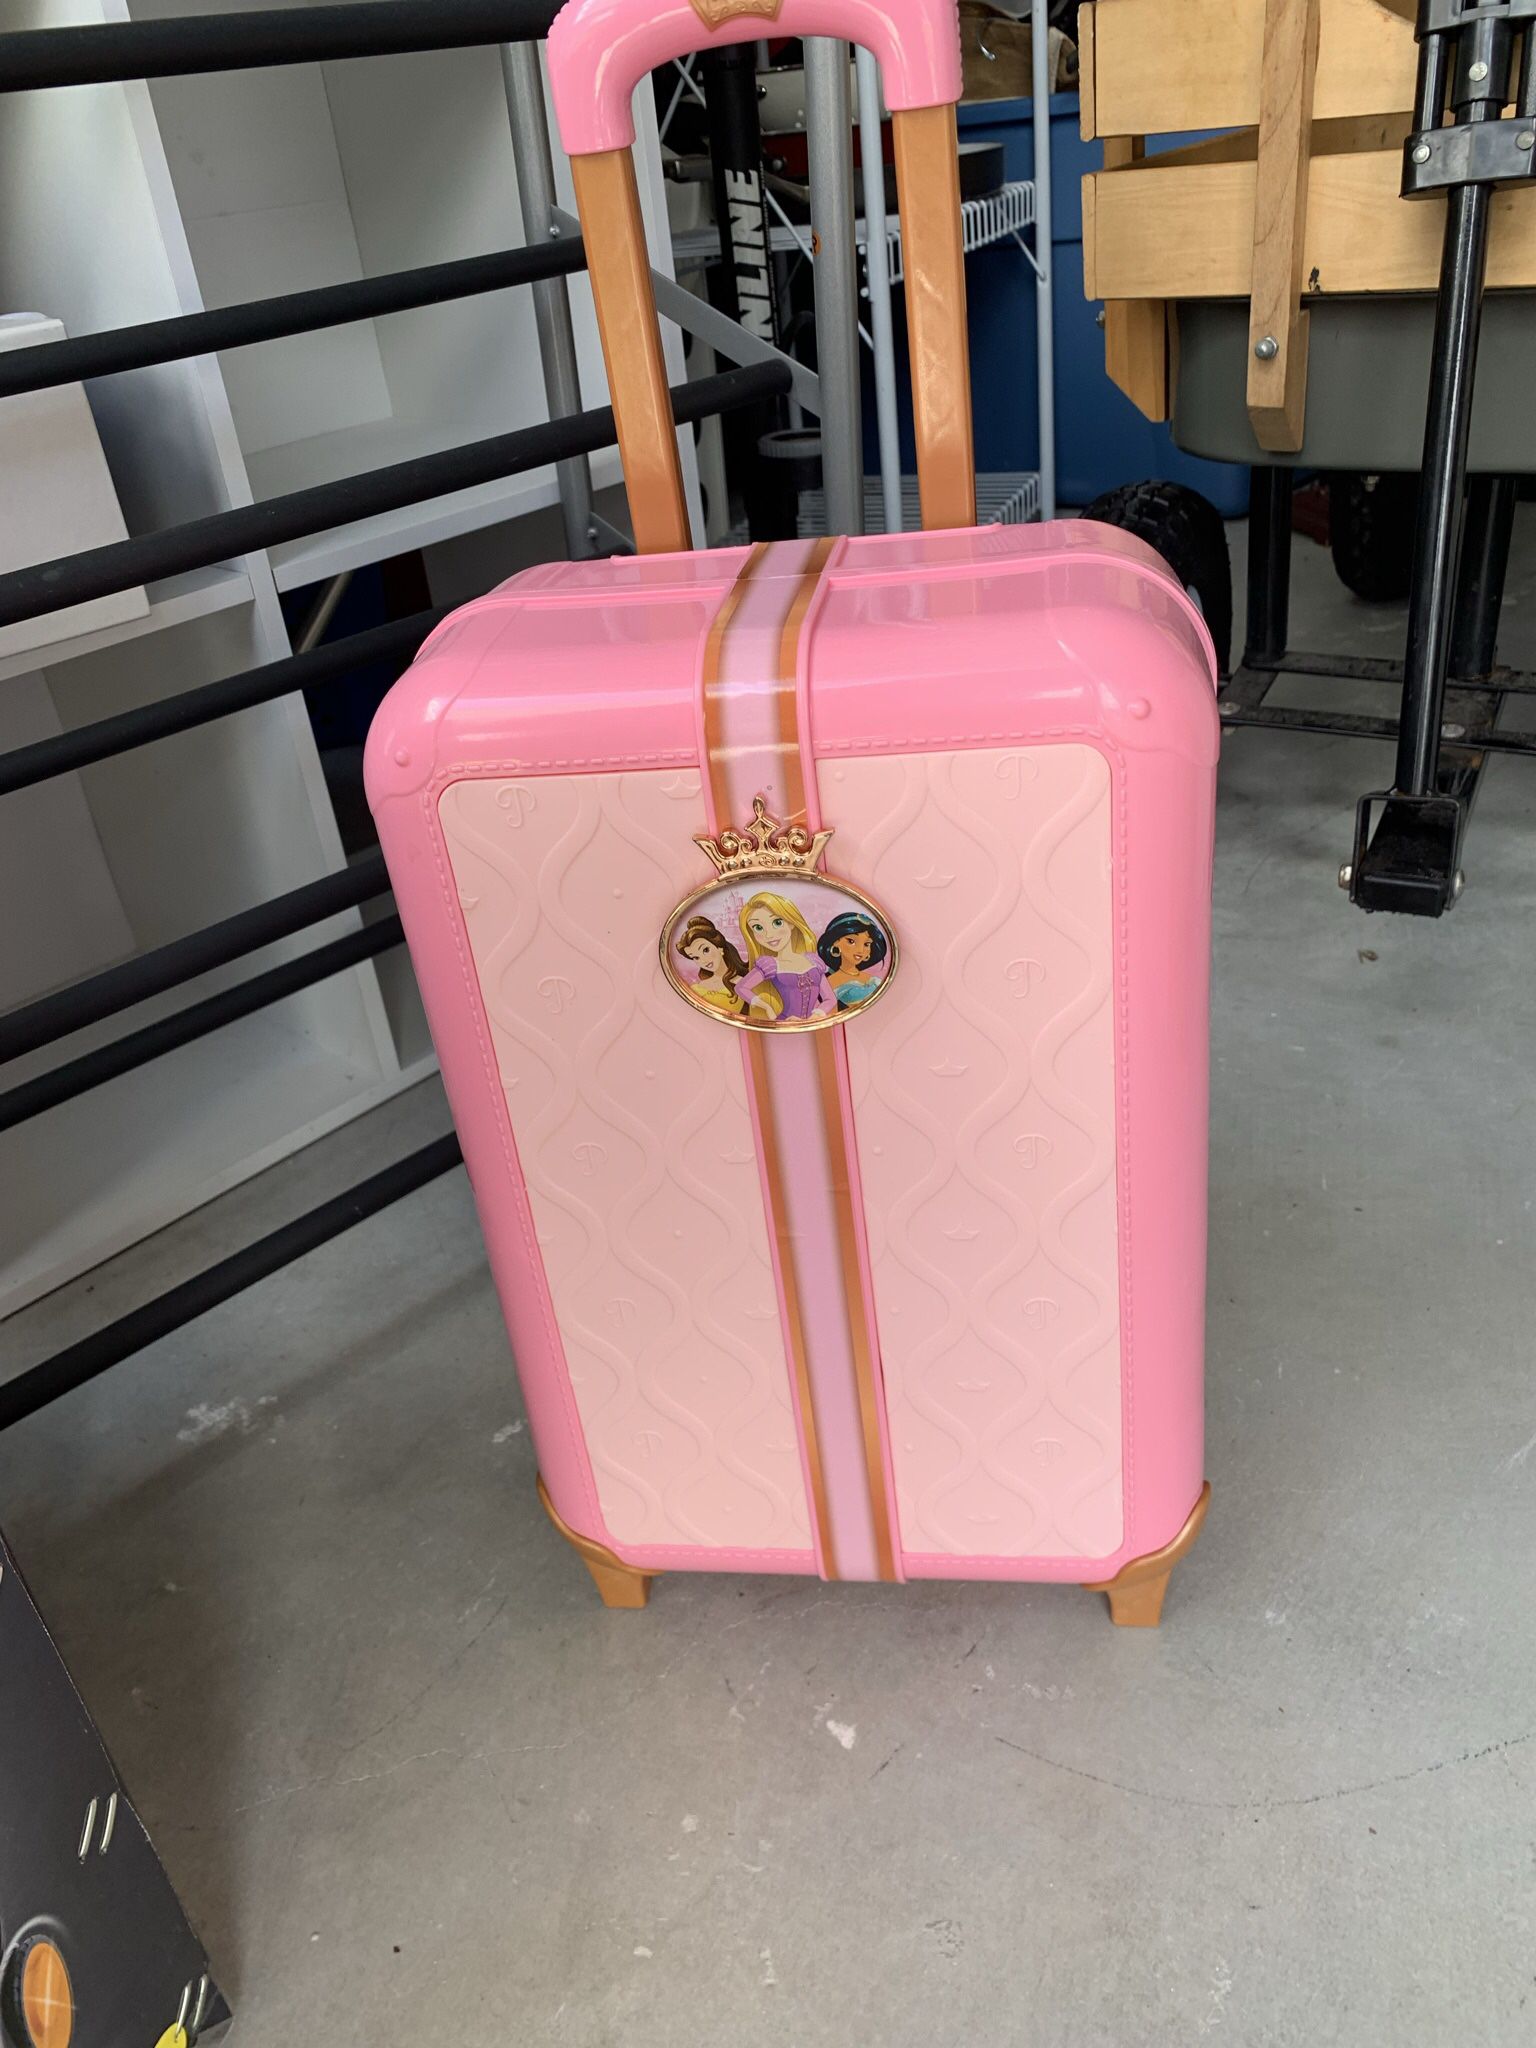 Cinderella make-believe luggage. Toy Luggage.Great condition. Pick up in Jupiter.